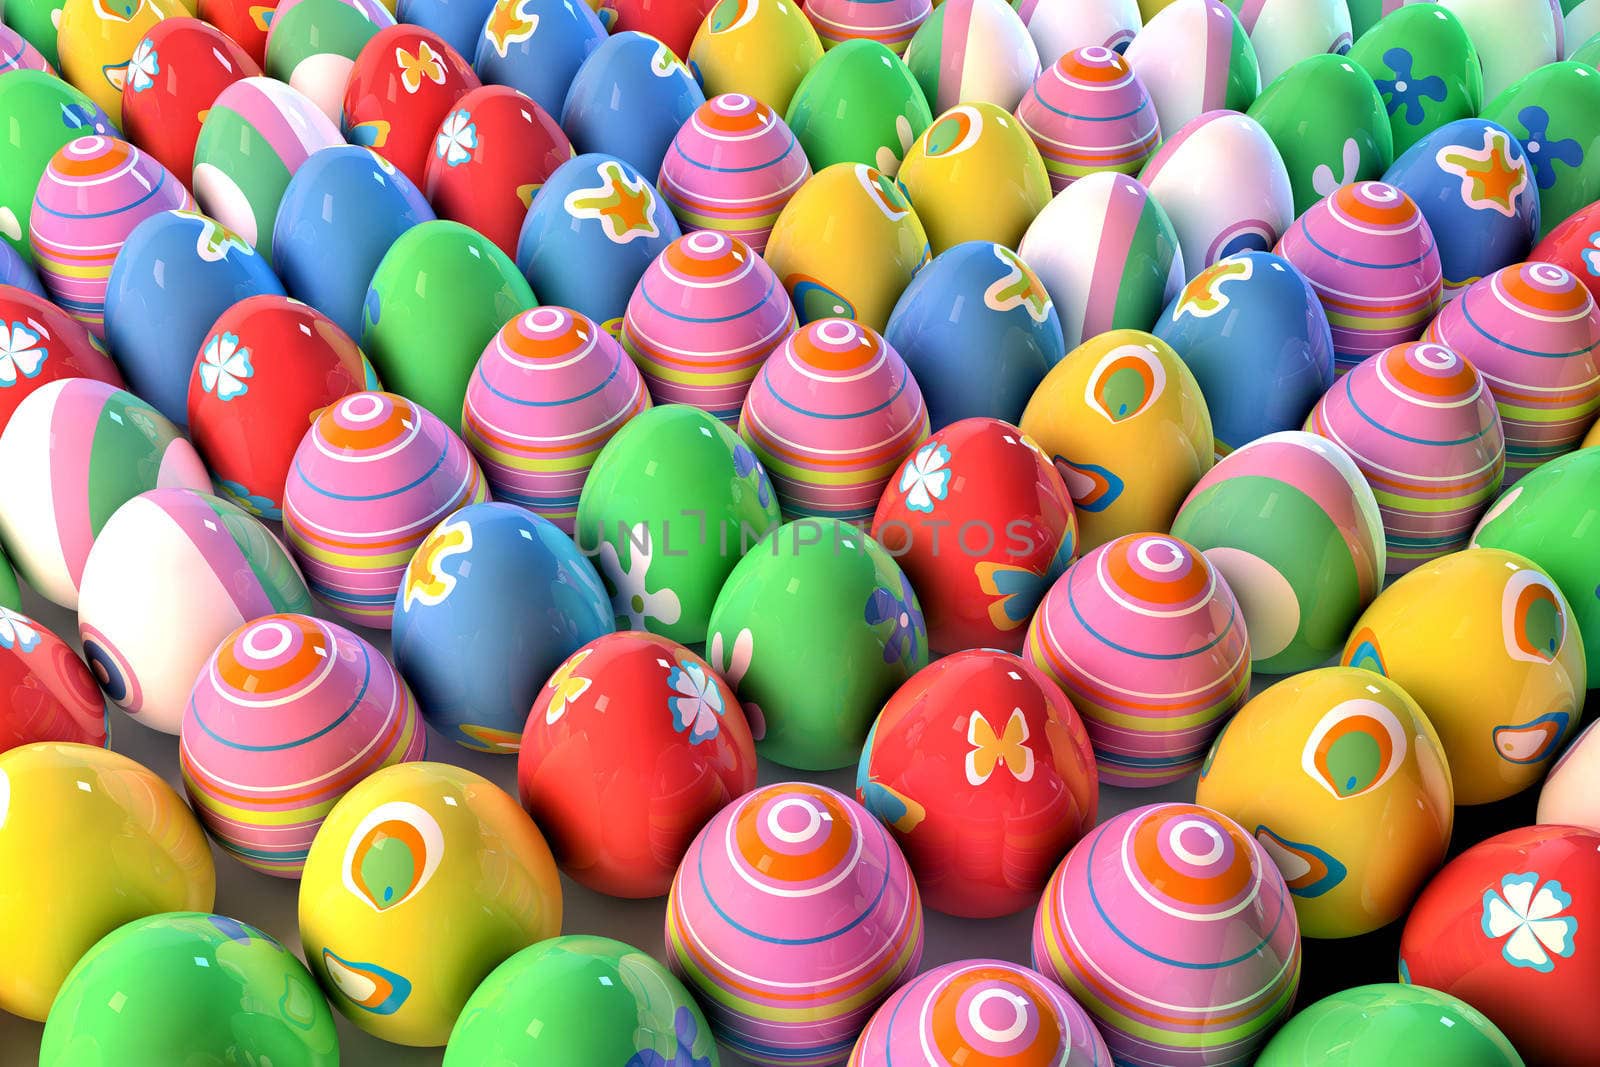 Large amount of Easter eggs decorated with different paintings